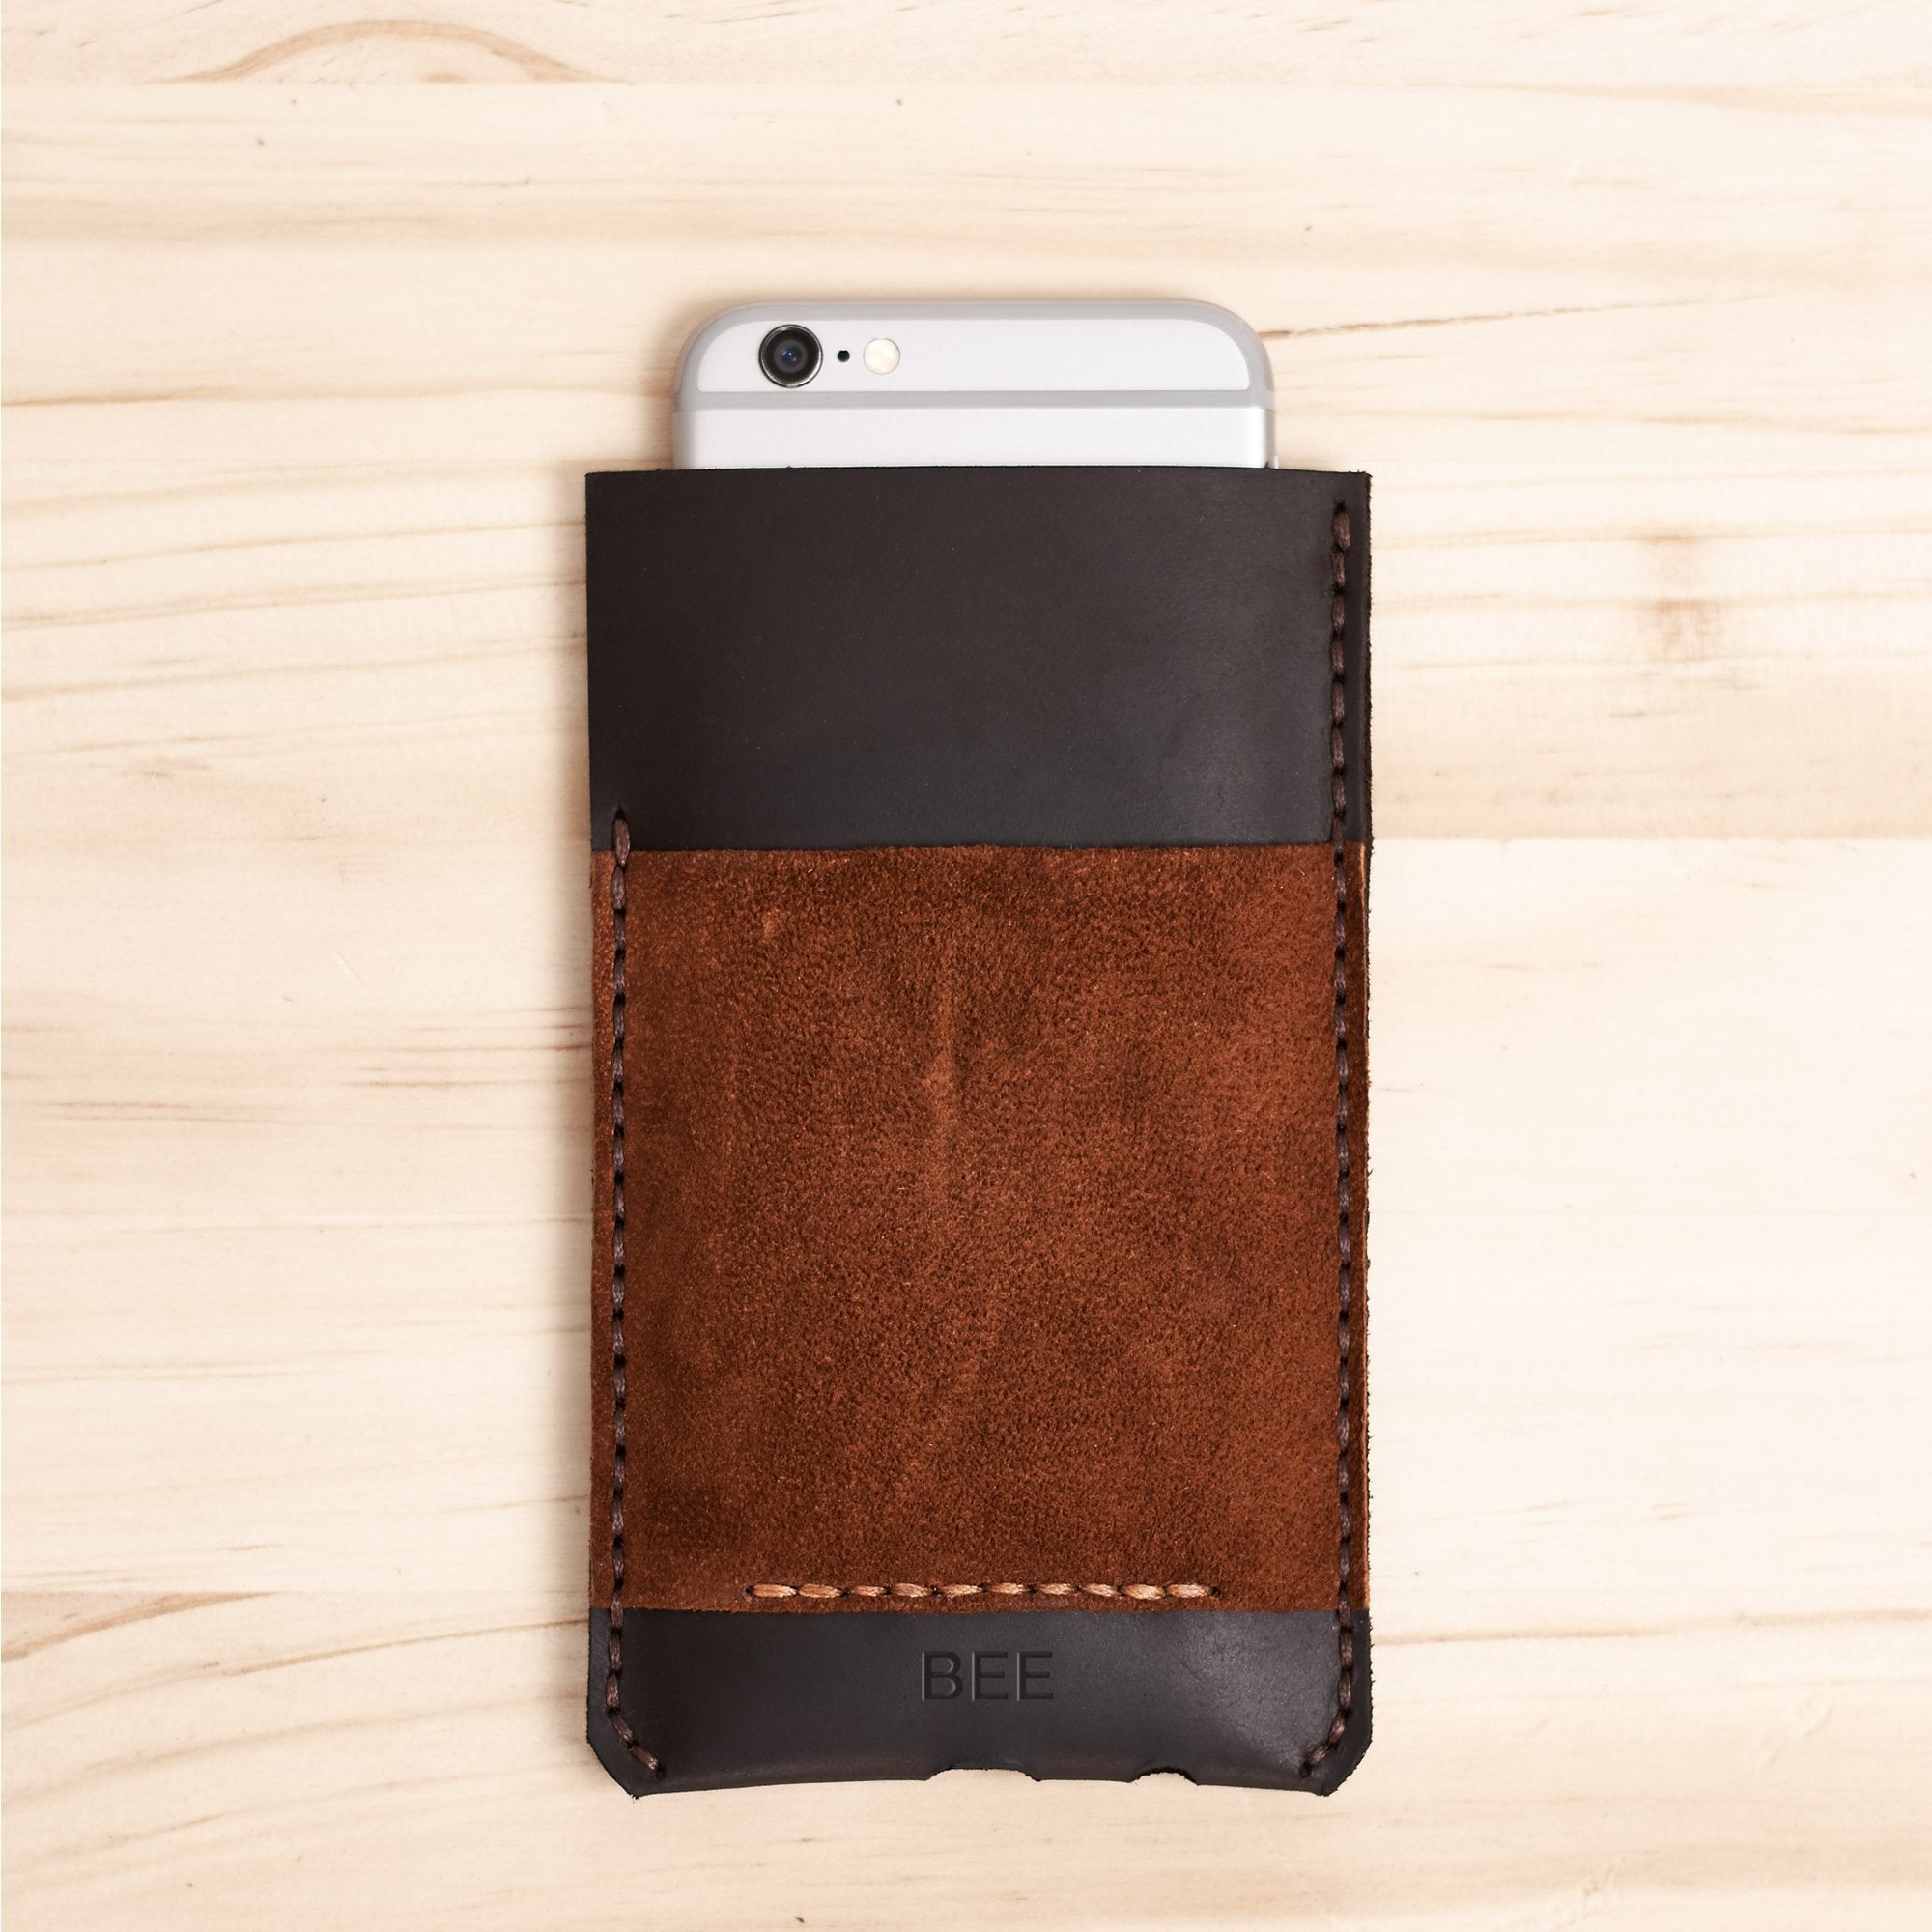 Handmade iPhone case  leather wallet for iPhone 8 Plus, iPhone x, iPhone 10, Name Engraving